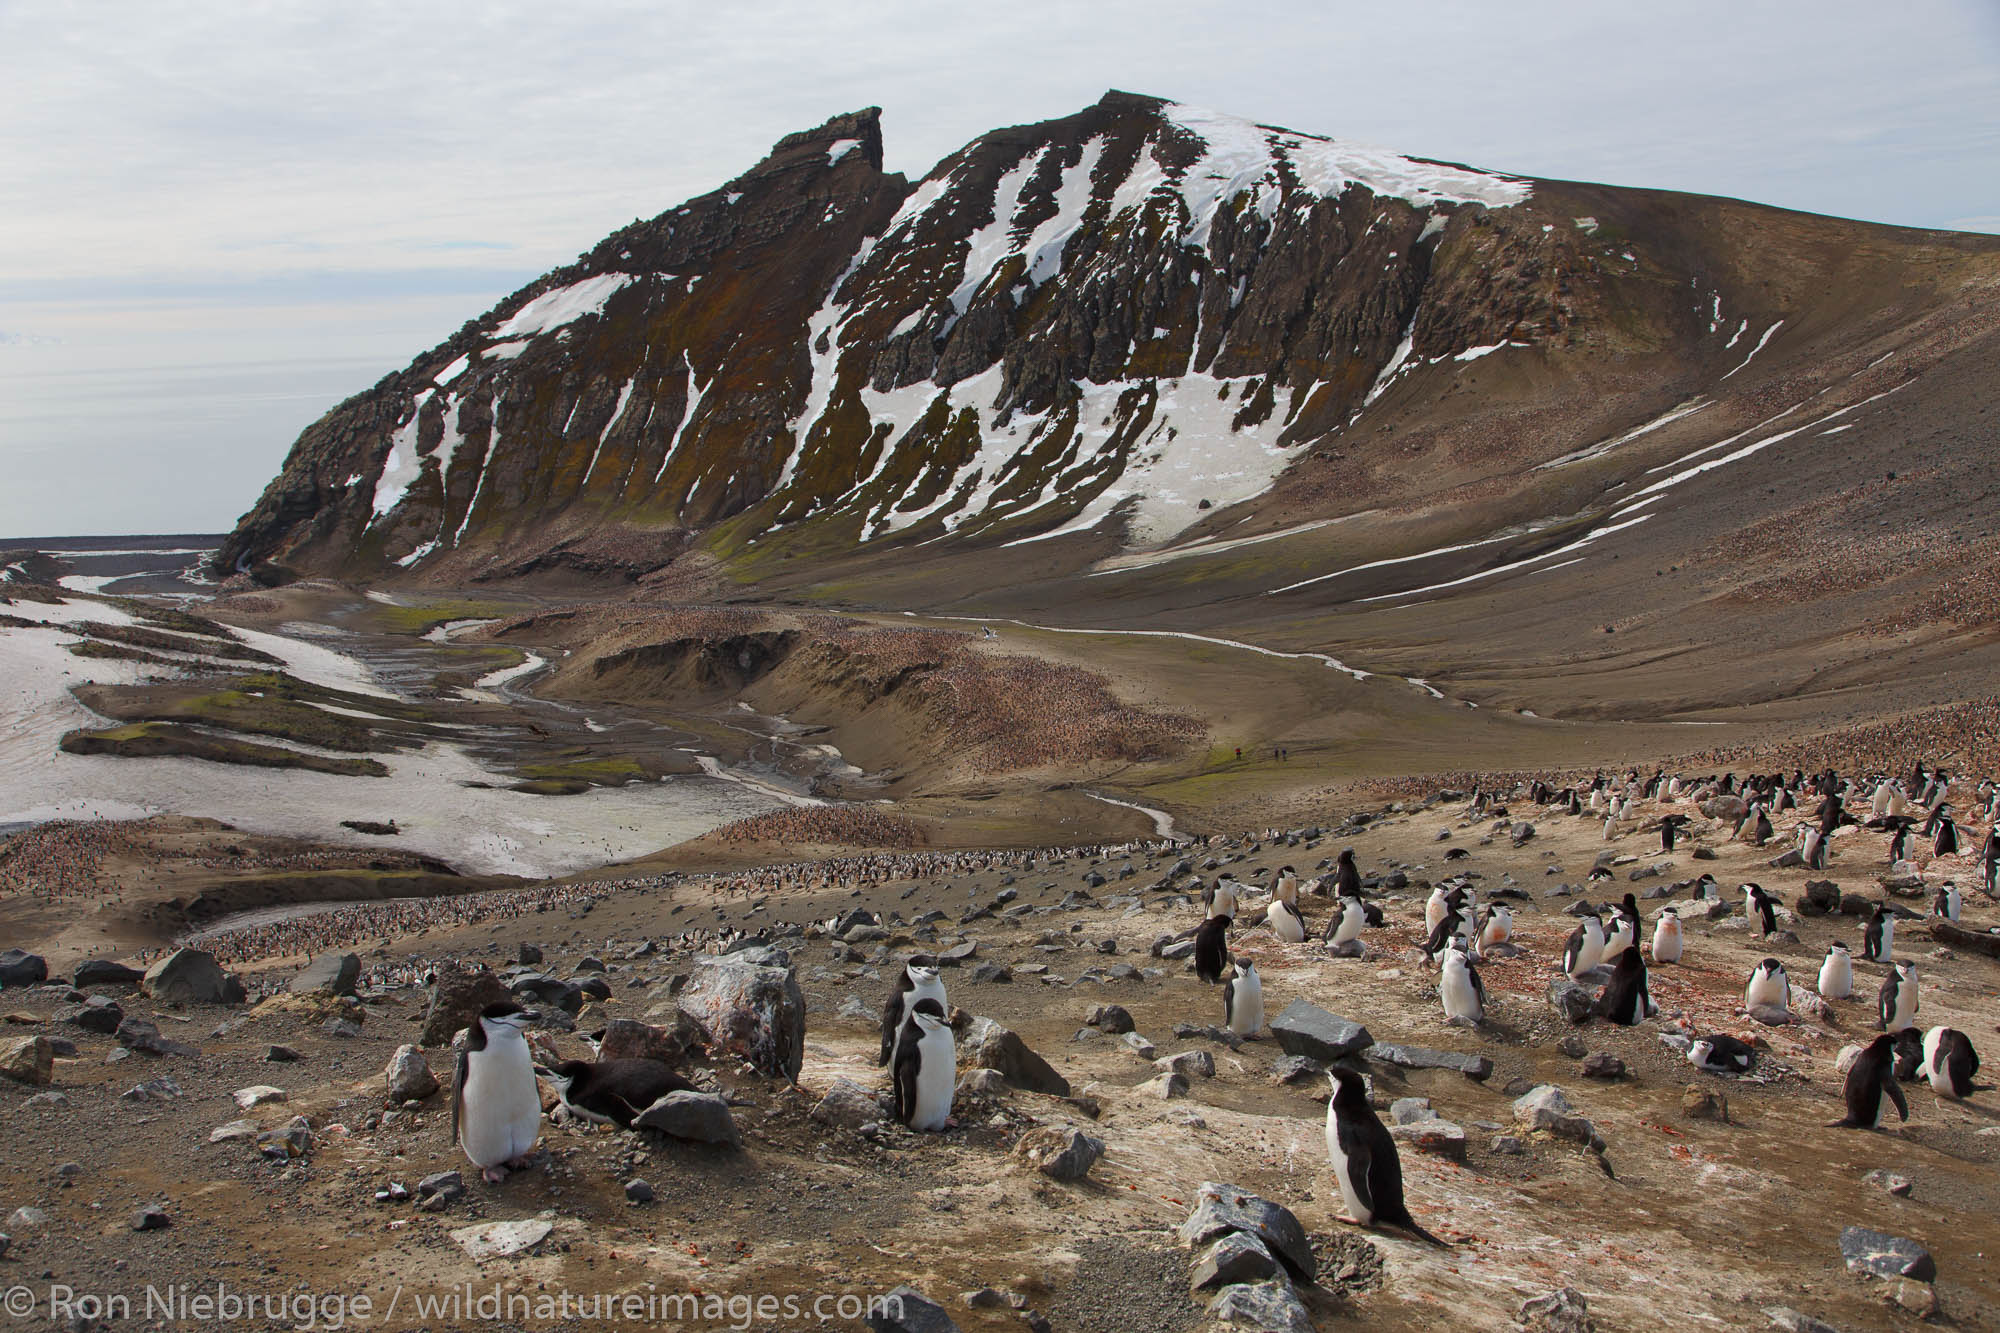 Chinstrap Penguin (Pygoscelis antarctica) colony, on the hike from Baily Head to Whaler's Bay, Deception Island, Antarctica.